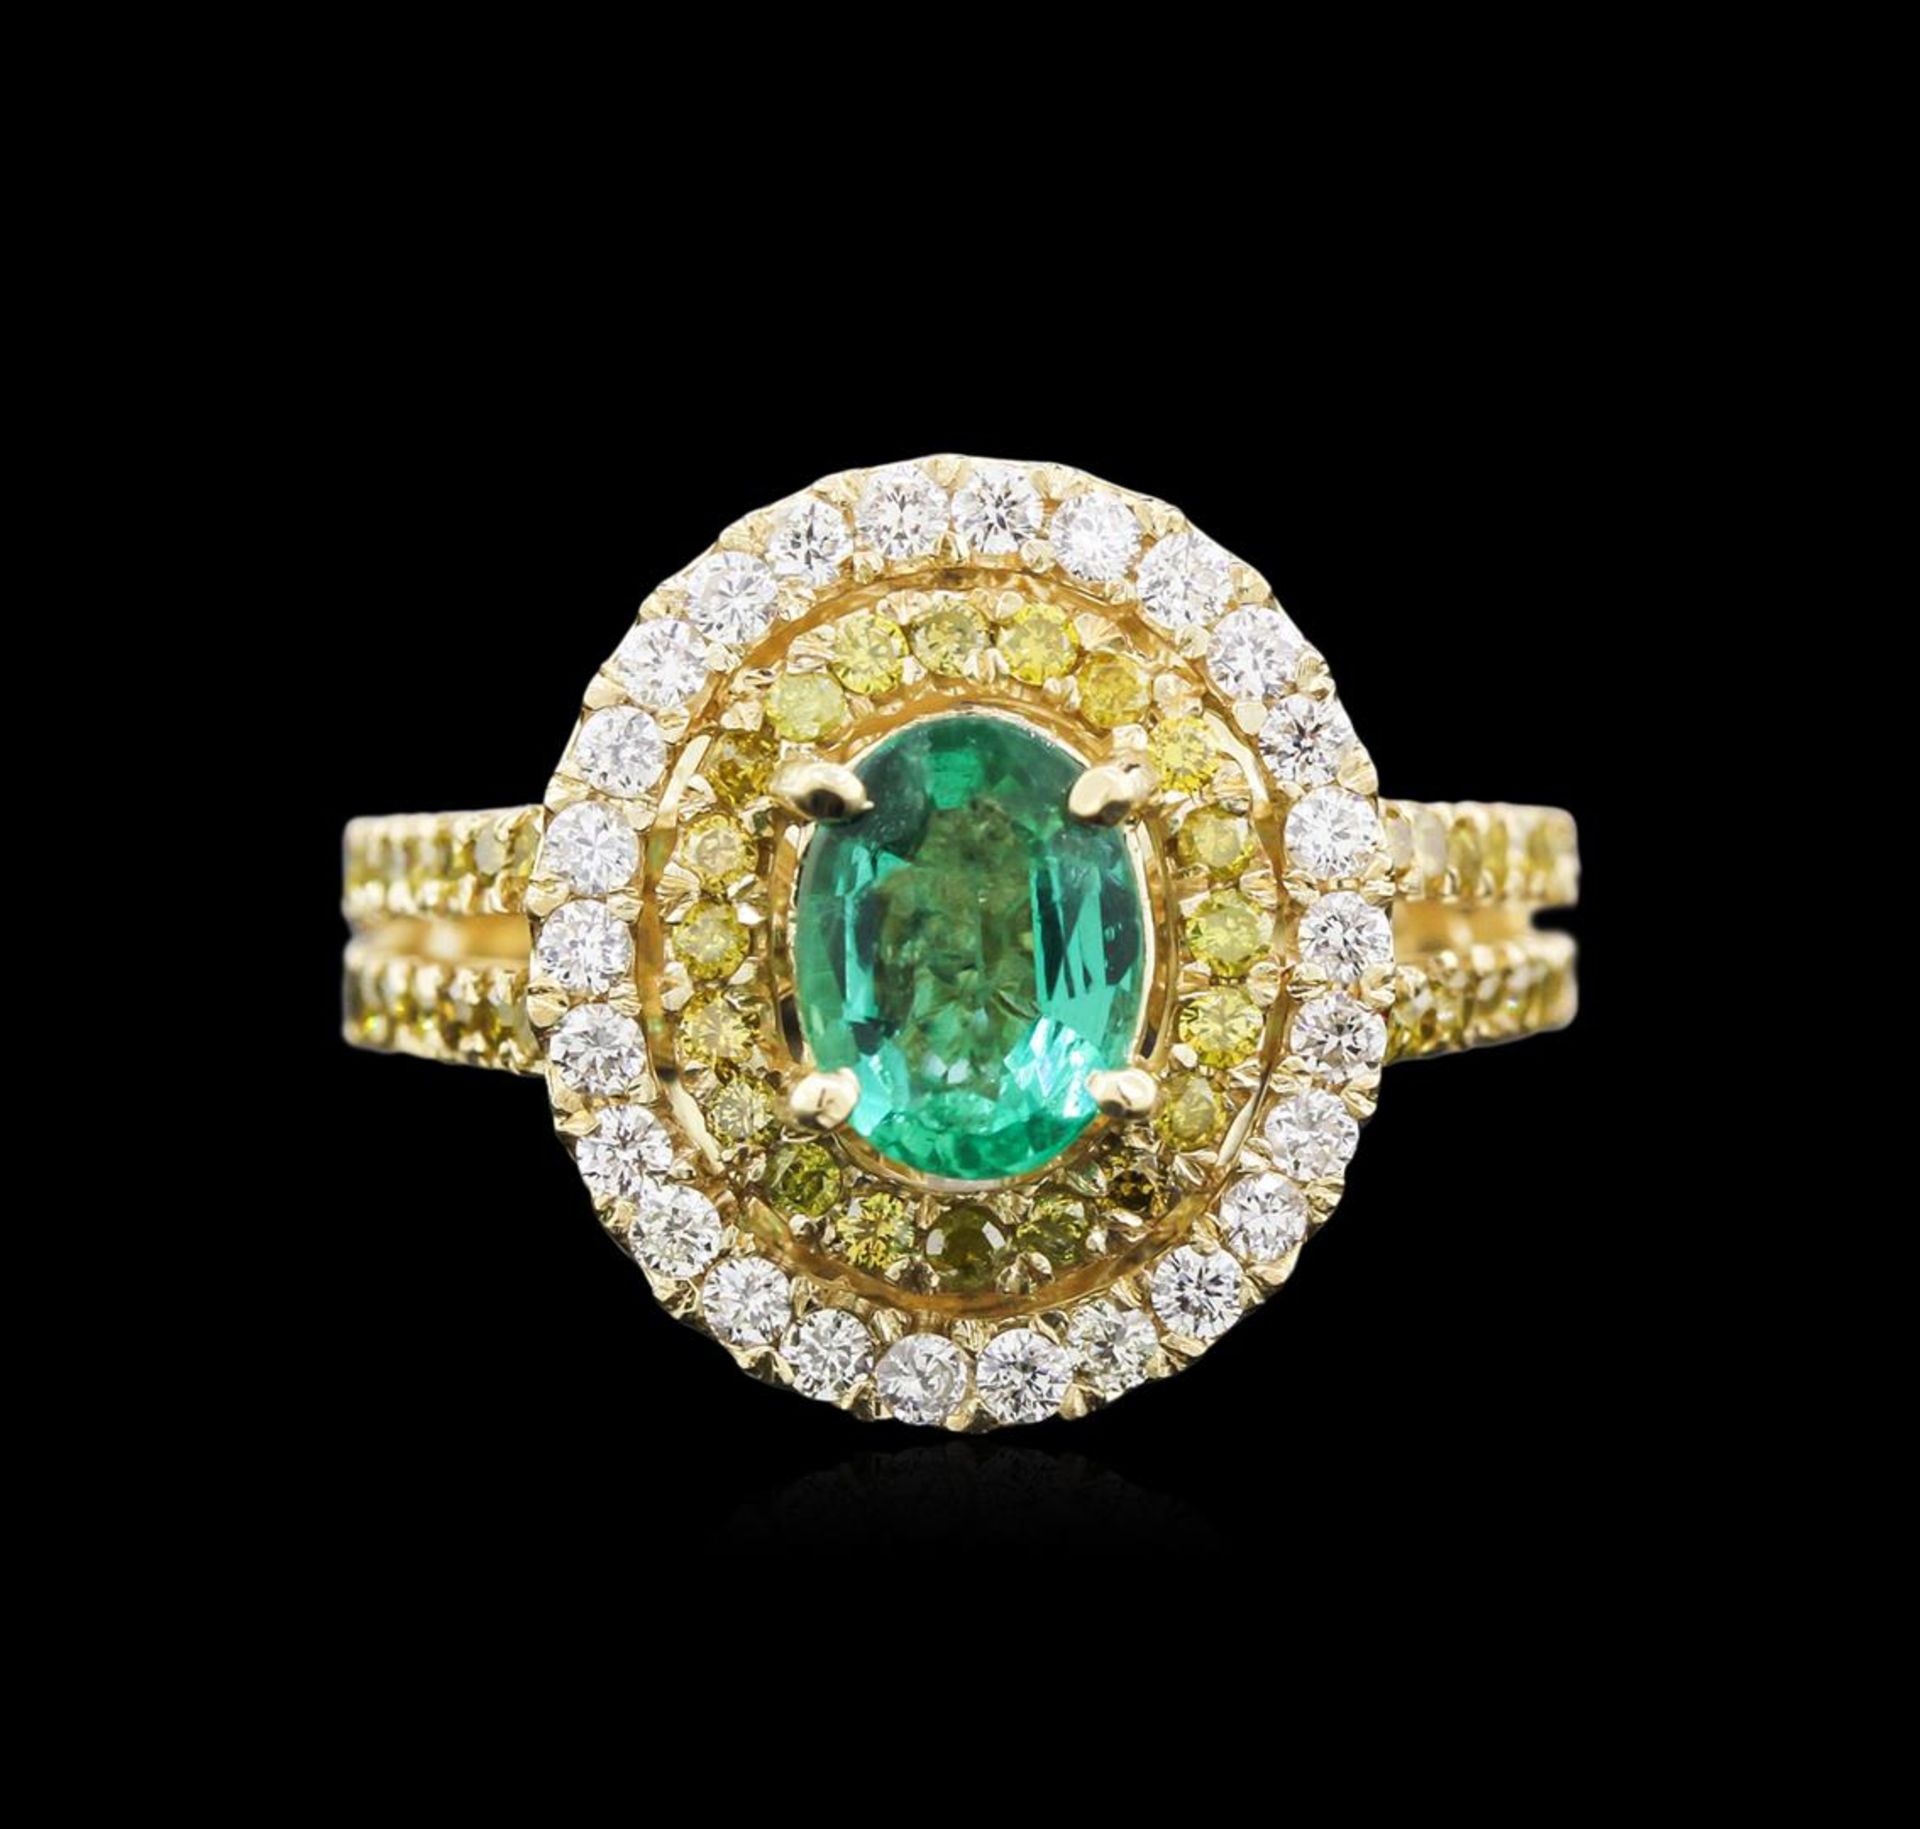 0.88 ctw Emerald and Diamond Ring - 14KT Yellow Gold - Image 2 of 3